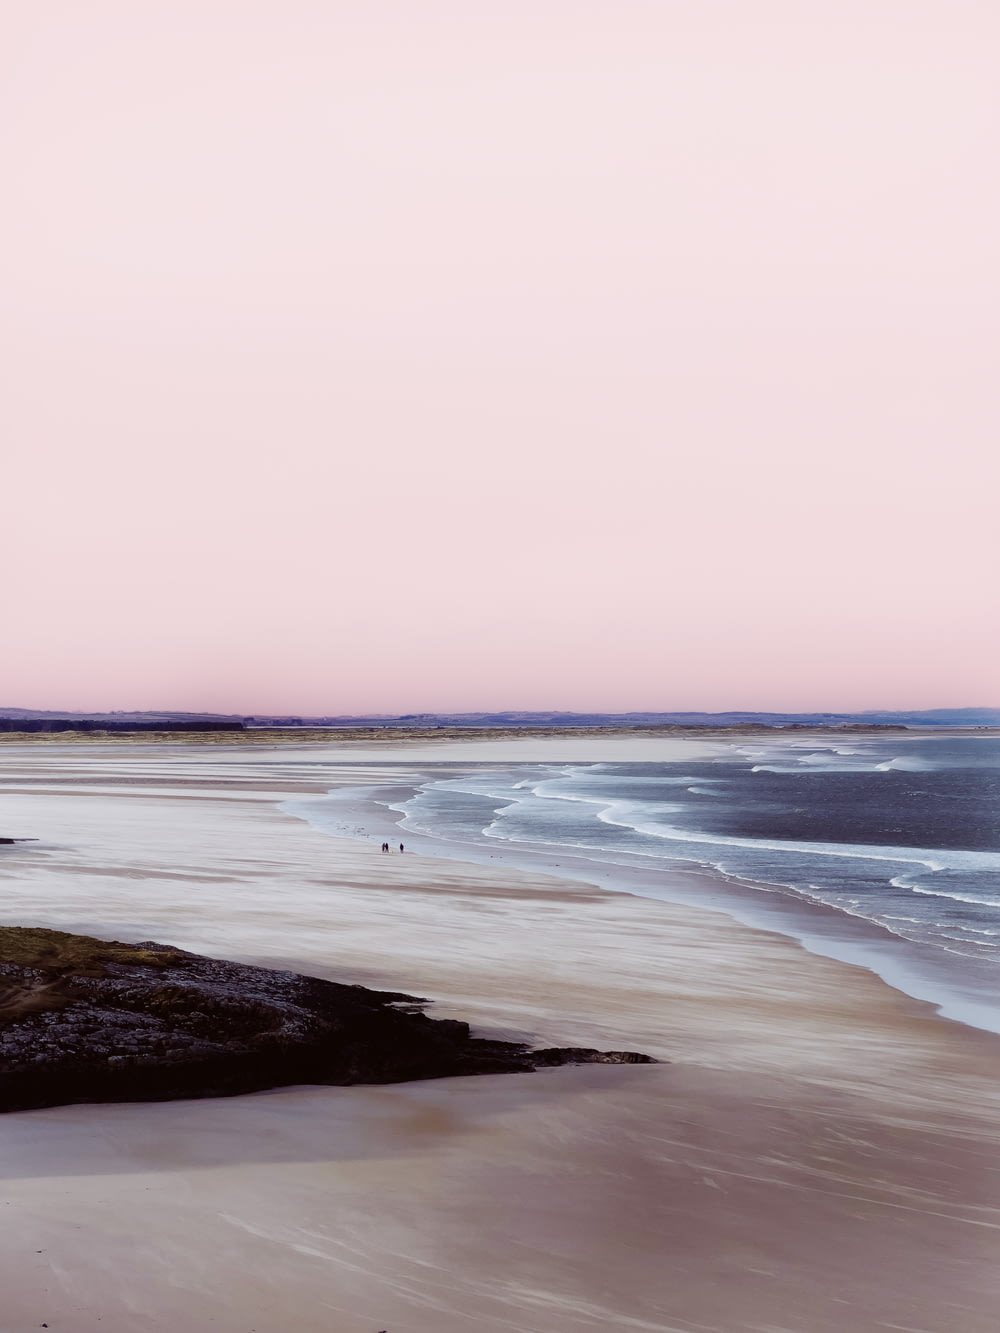 a pink sky over a sandy beach with waves